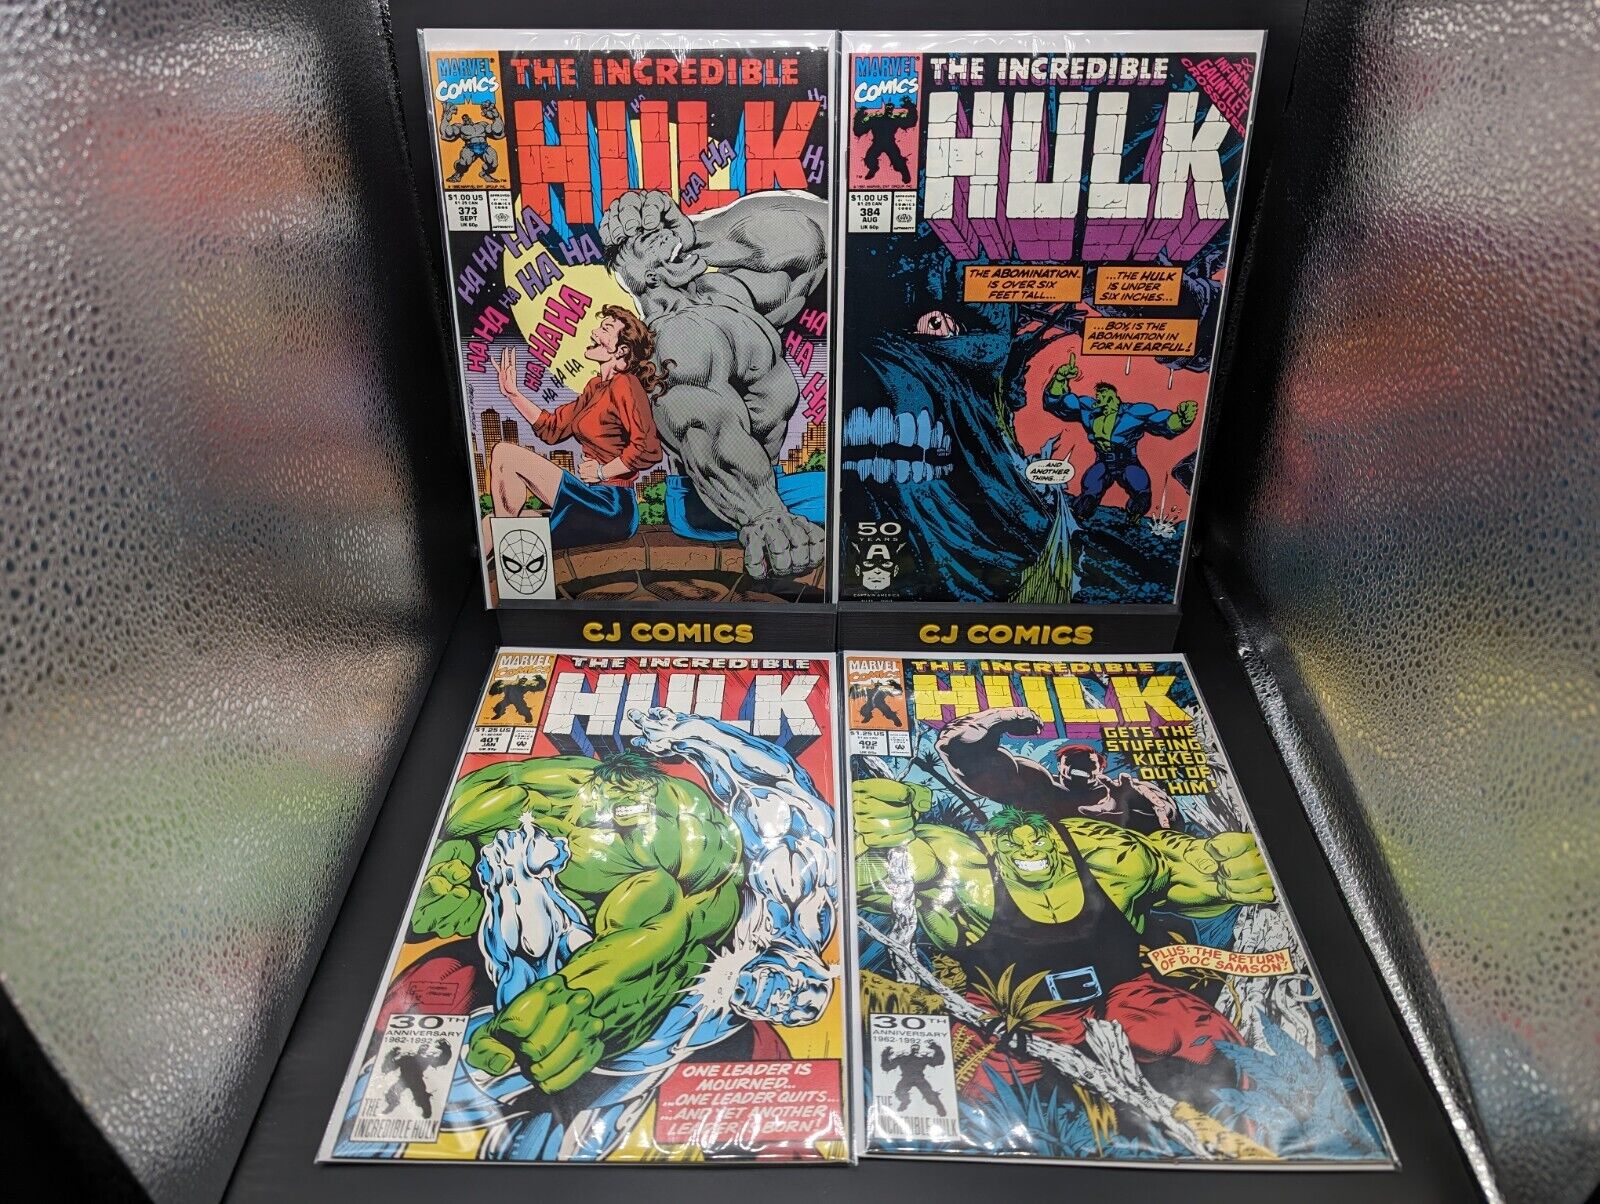 The Incredible Hulk 10 Comic Range from issue numbers 373 to 409